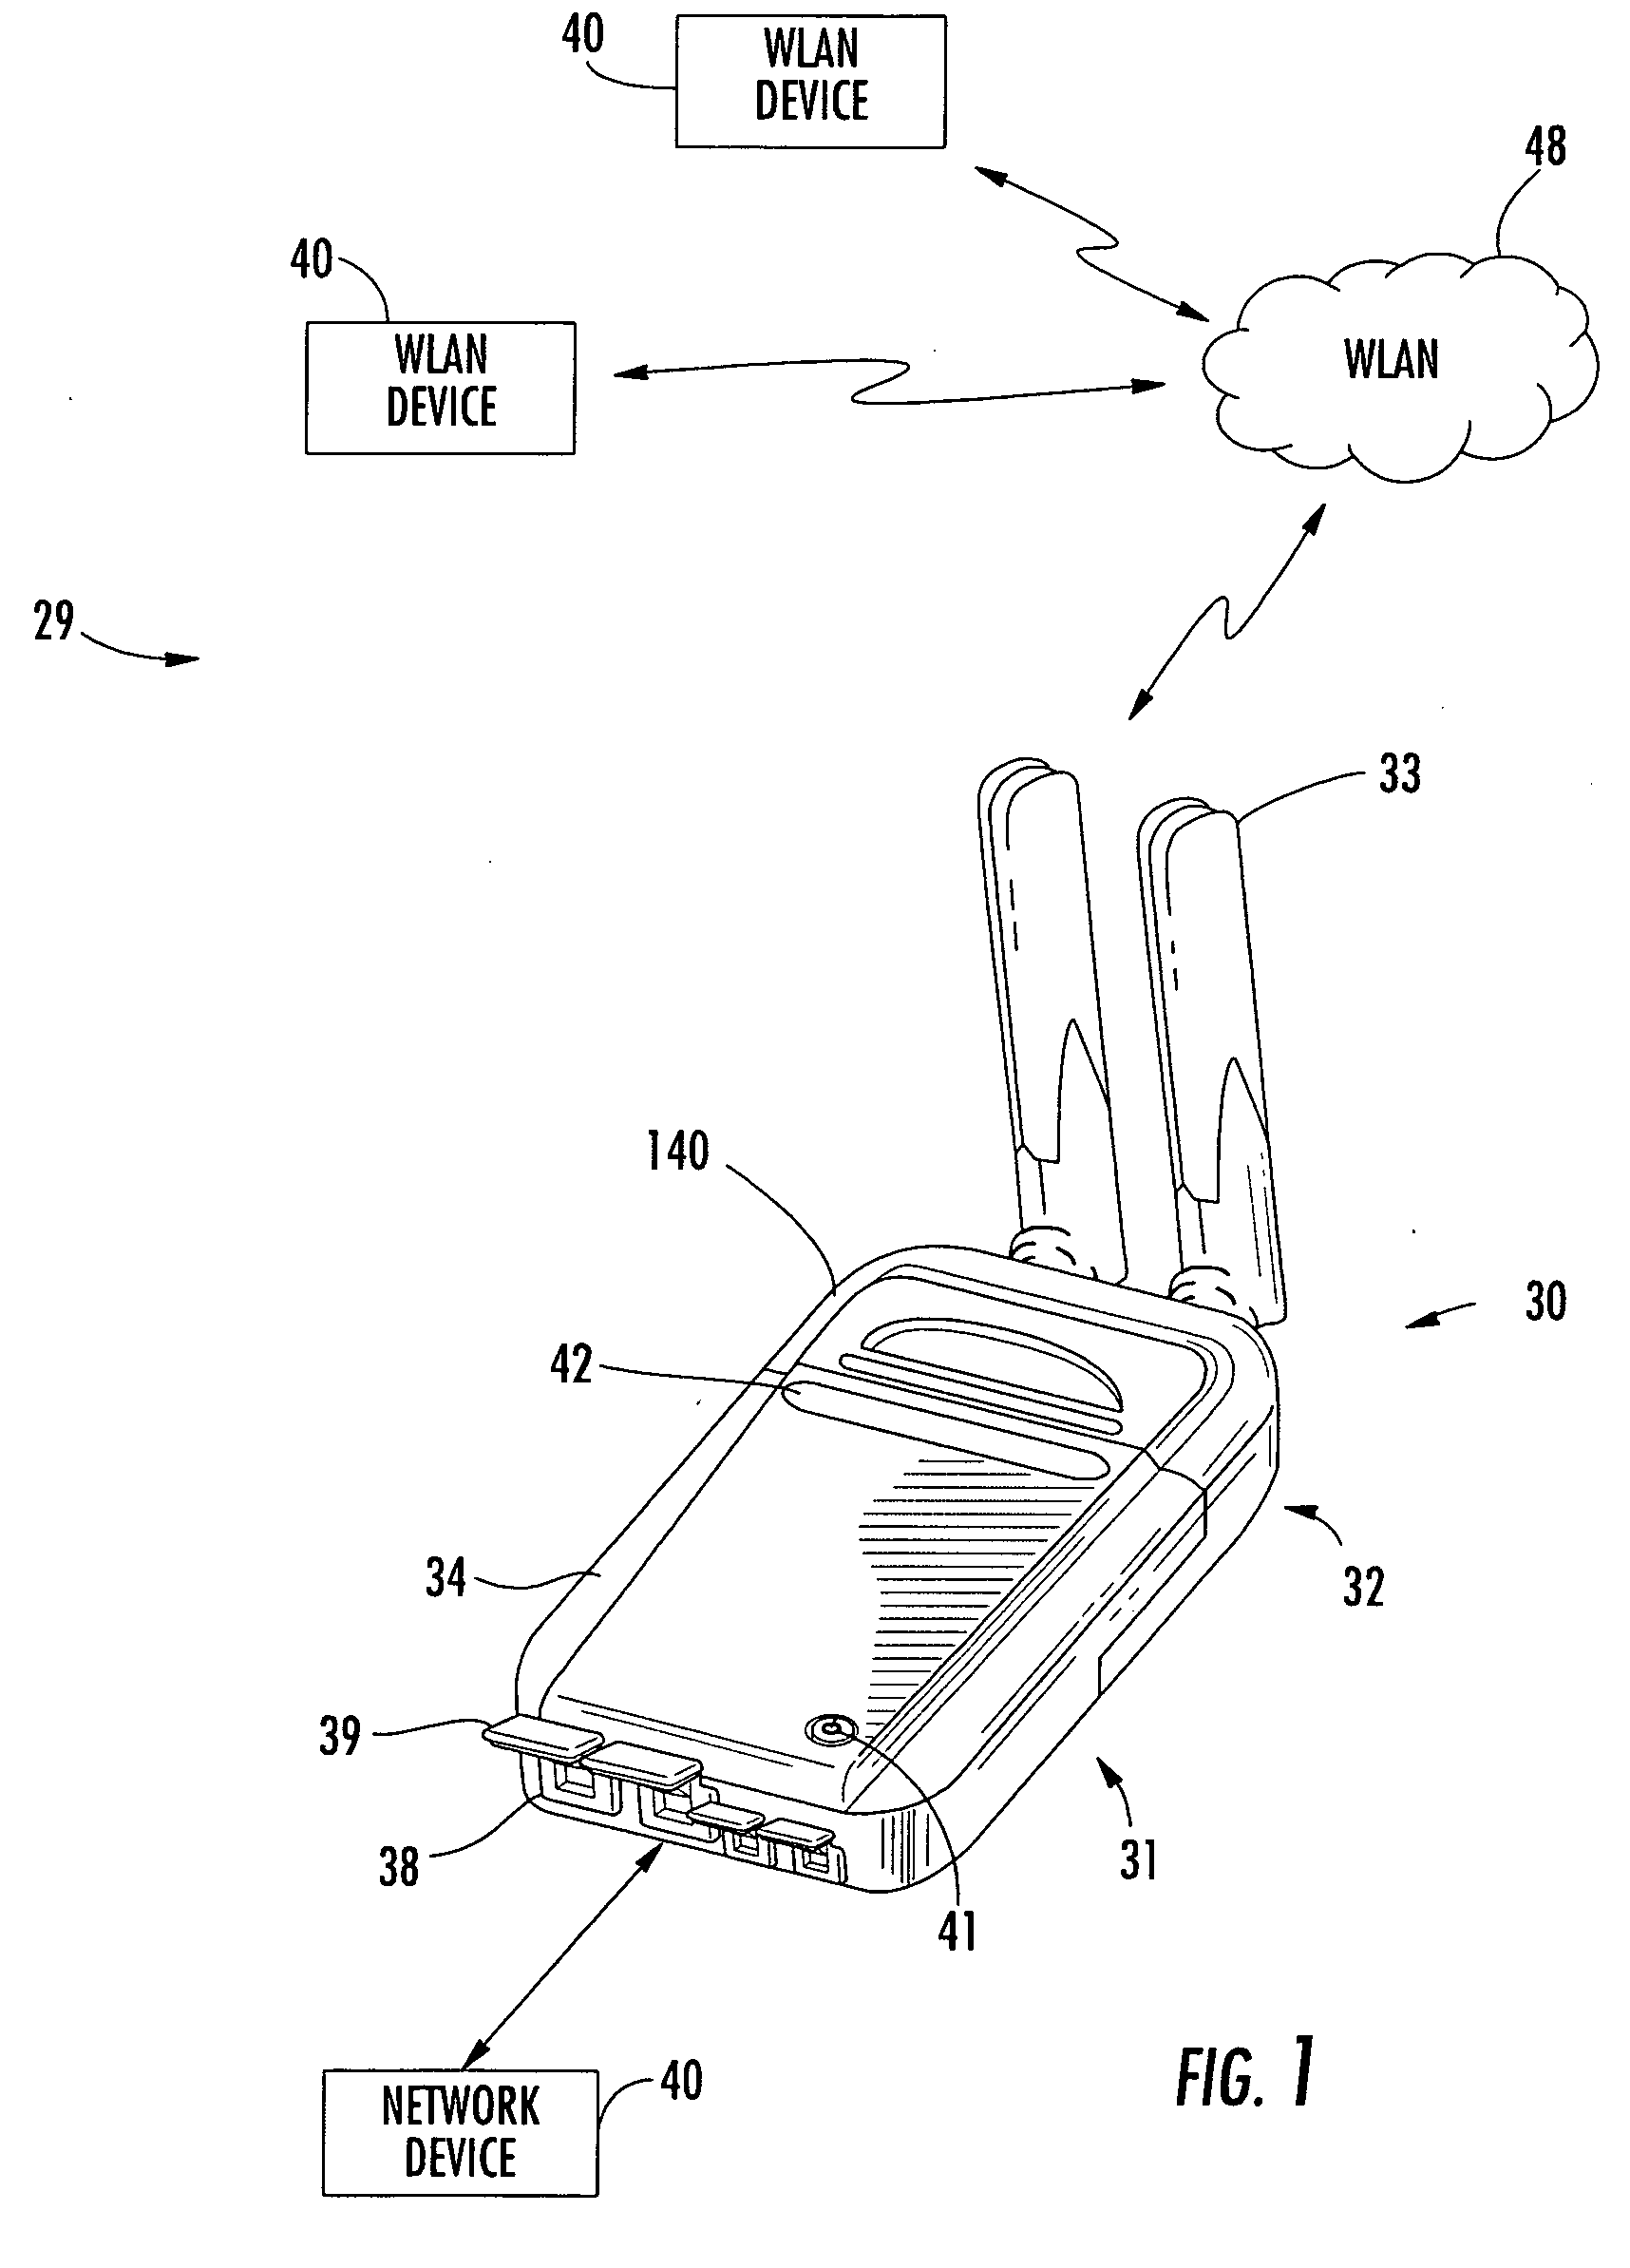 Modular cryptographic device providing status determining features and related methods